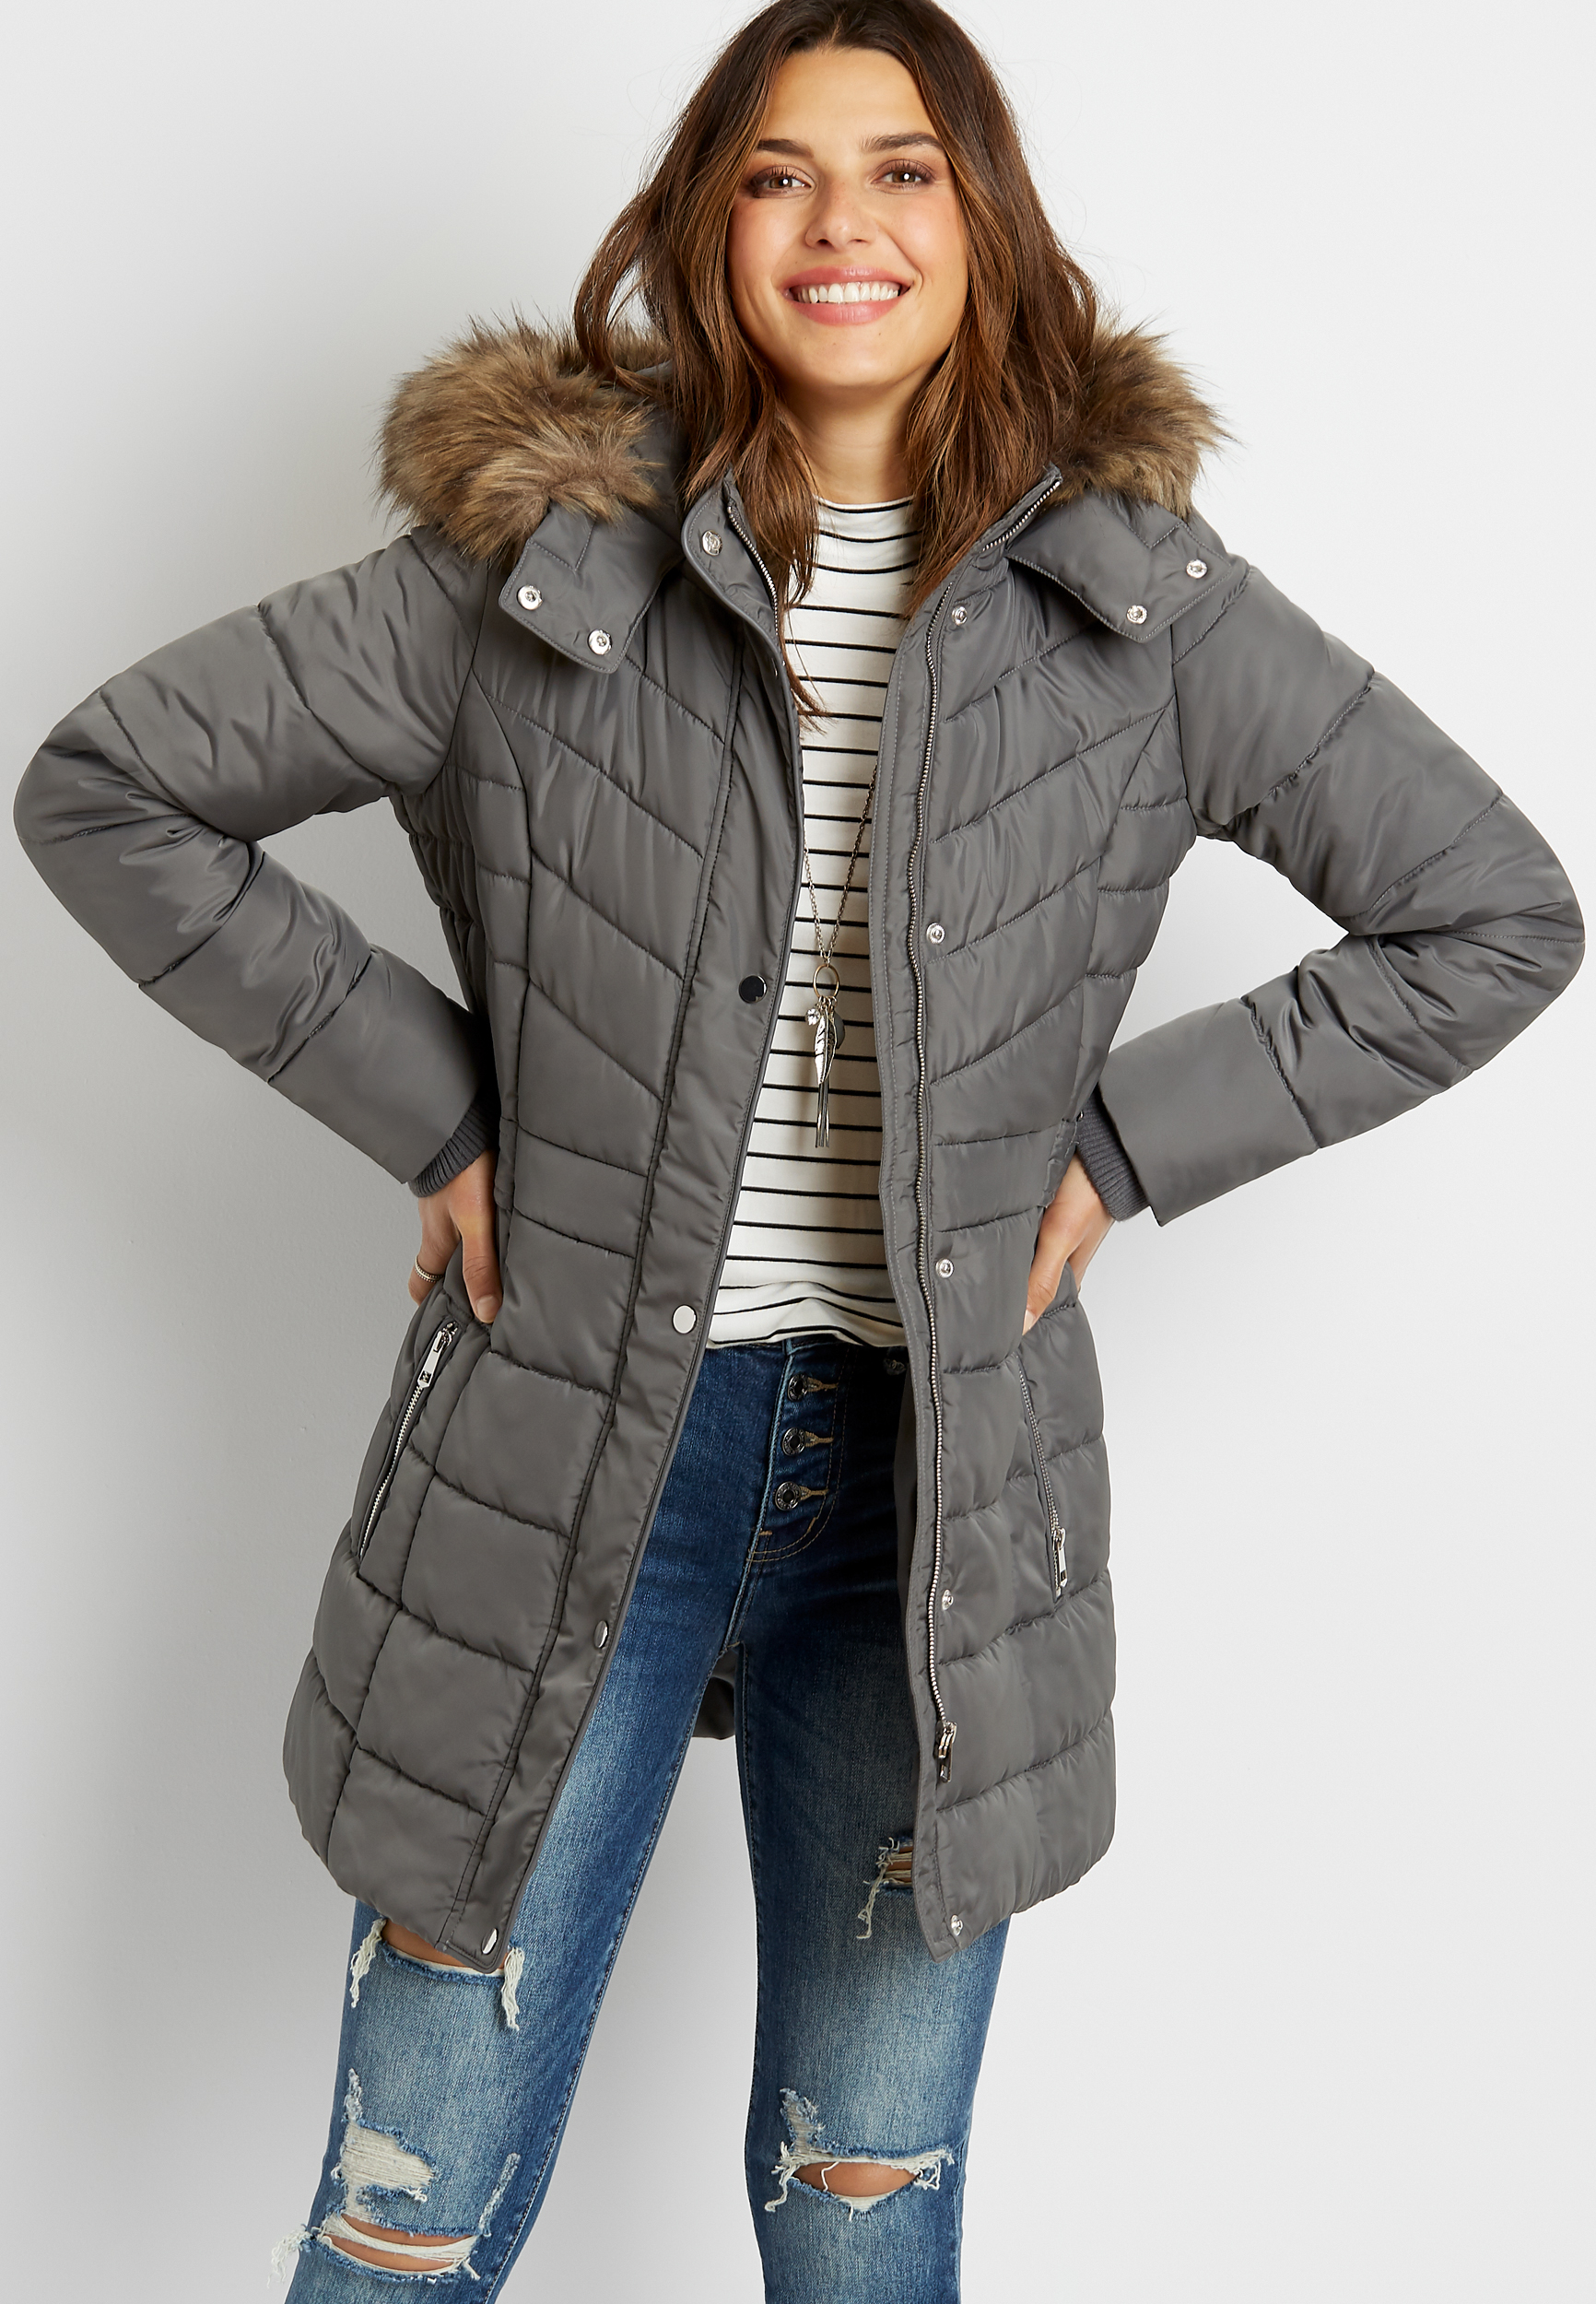 Gray Puffer Faux Fur Trim Hooded Outerwear Jacket | maurices